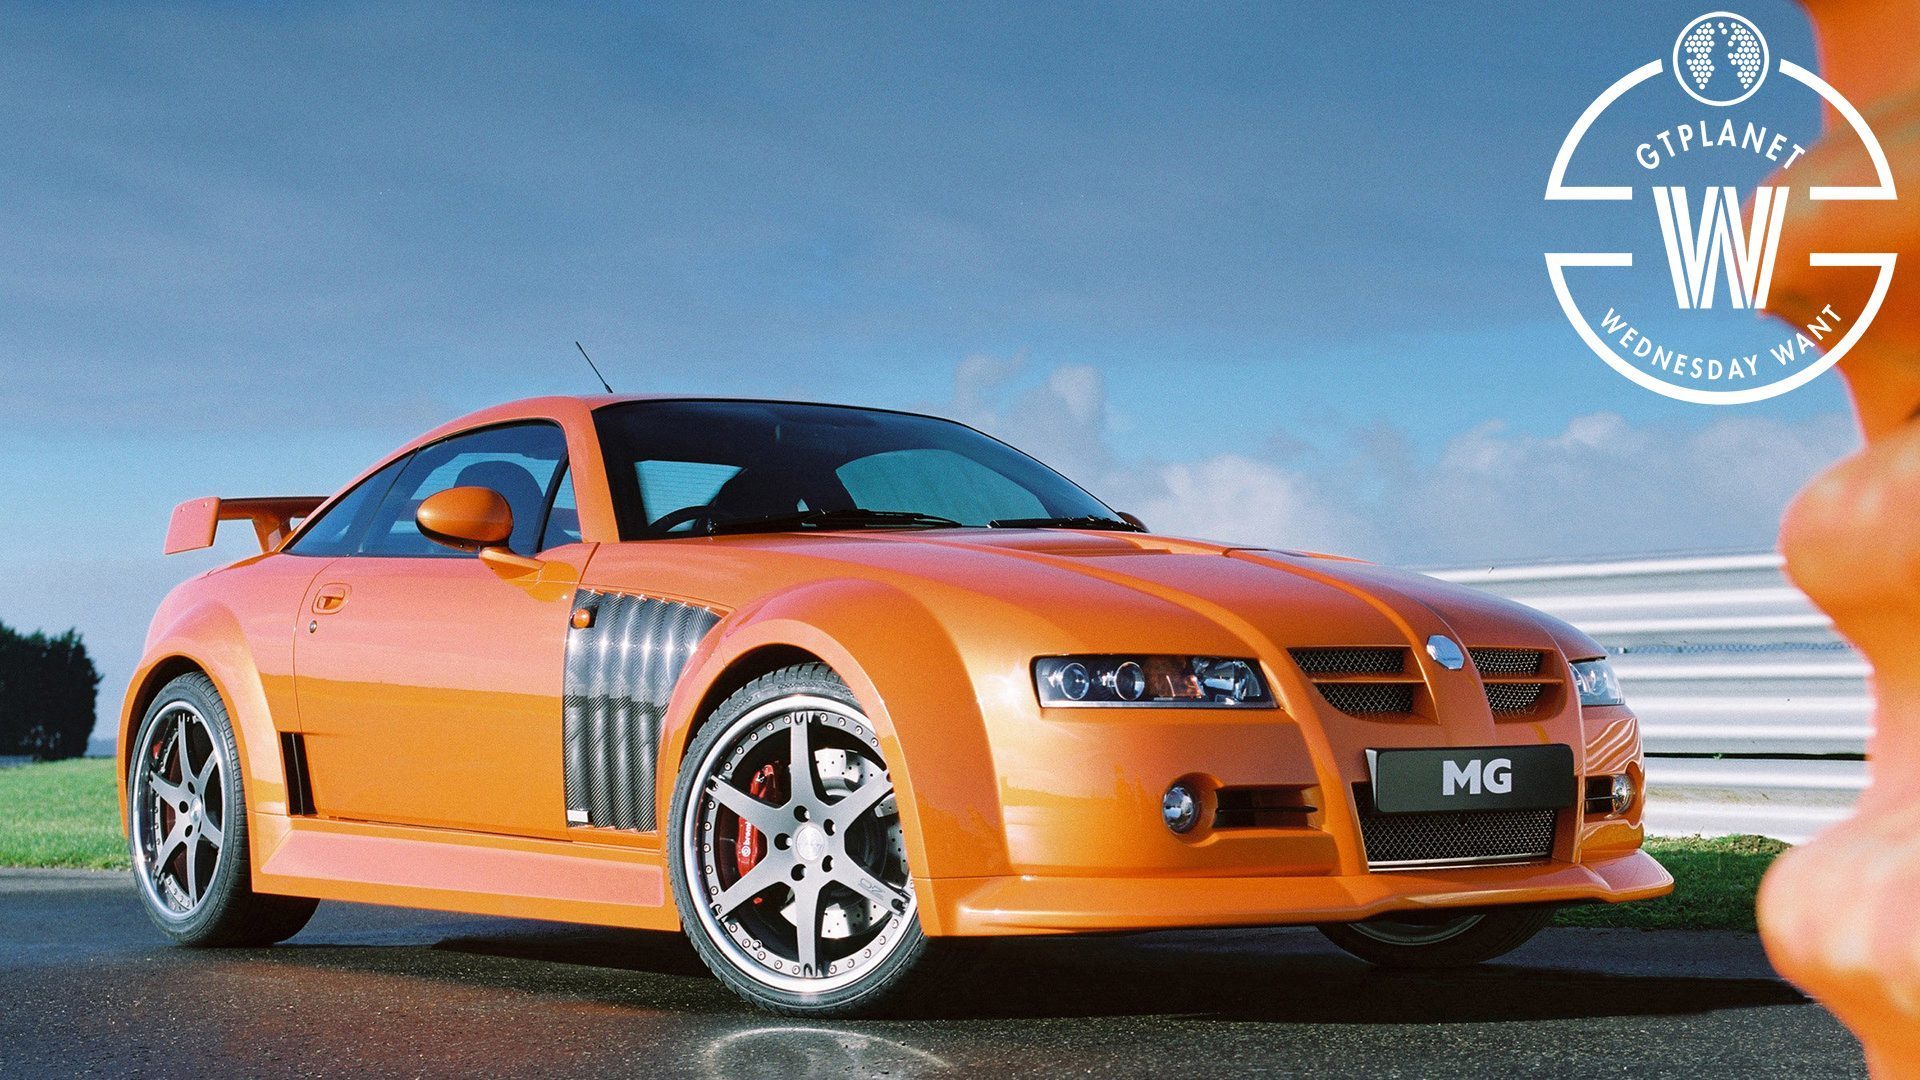 Wednesday Want: MG XPower SV